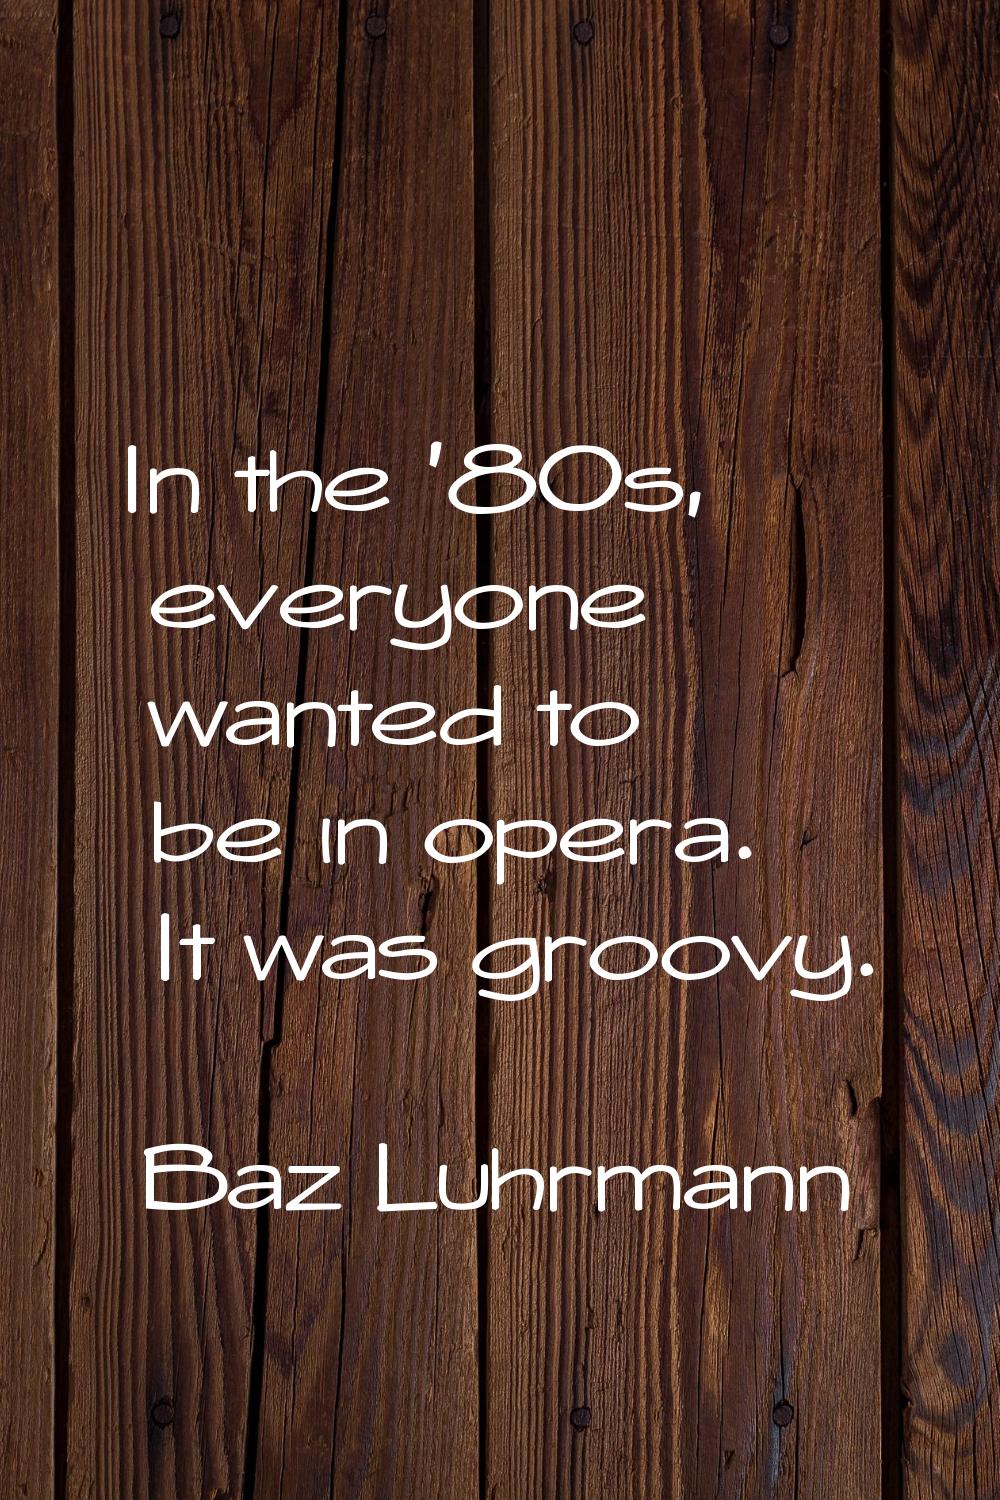 In the '80s, everyone wanted to be in opera. It was groovy.